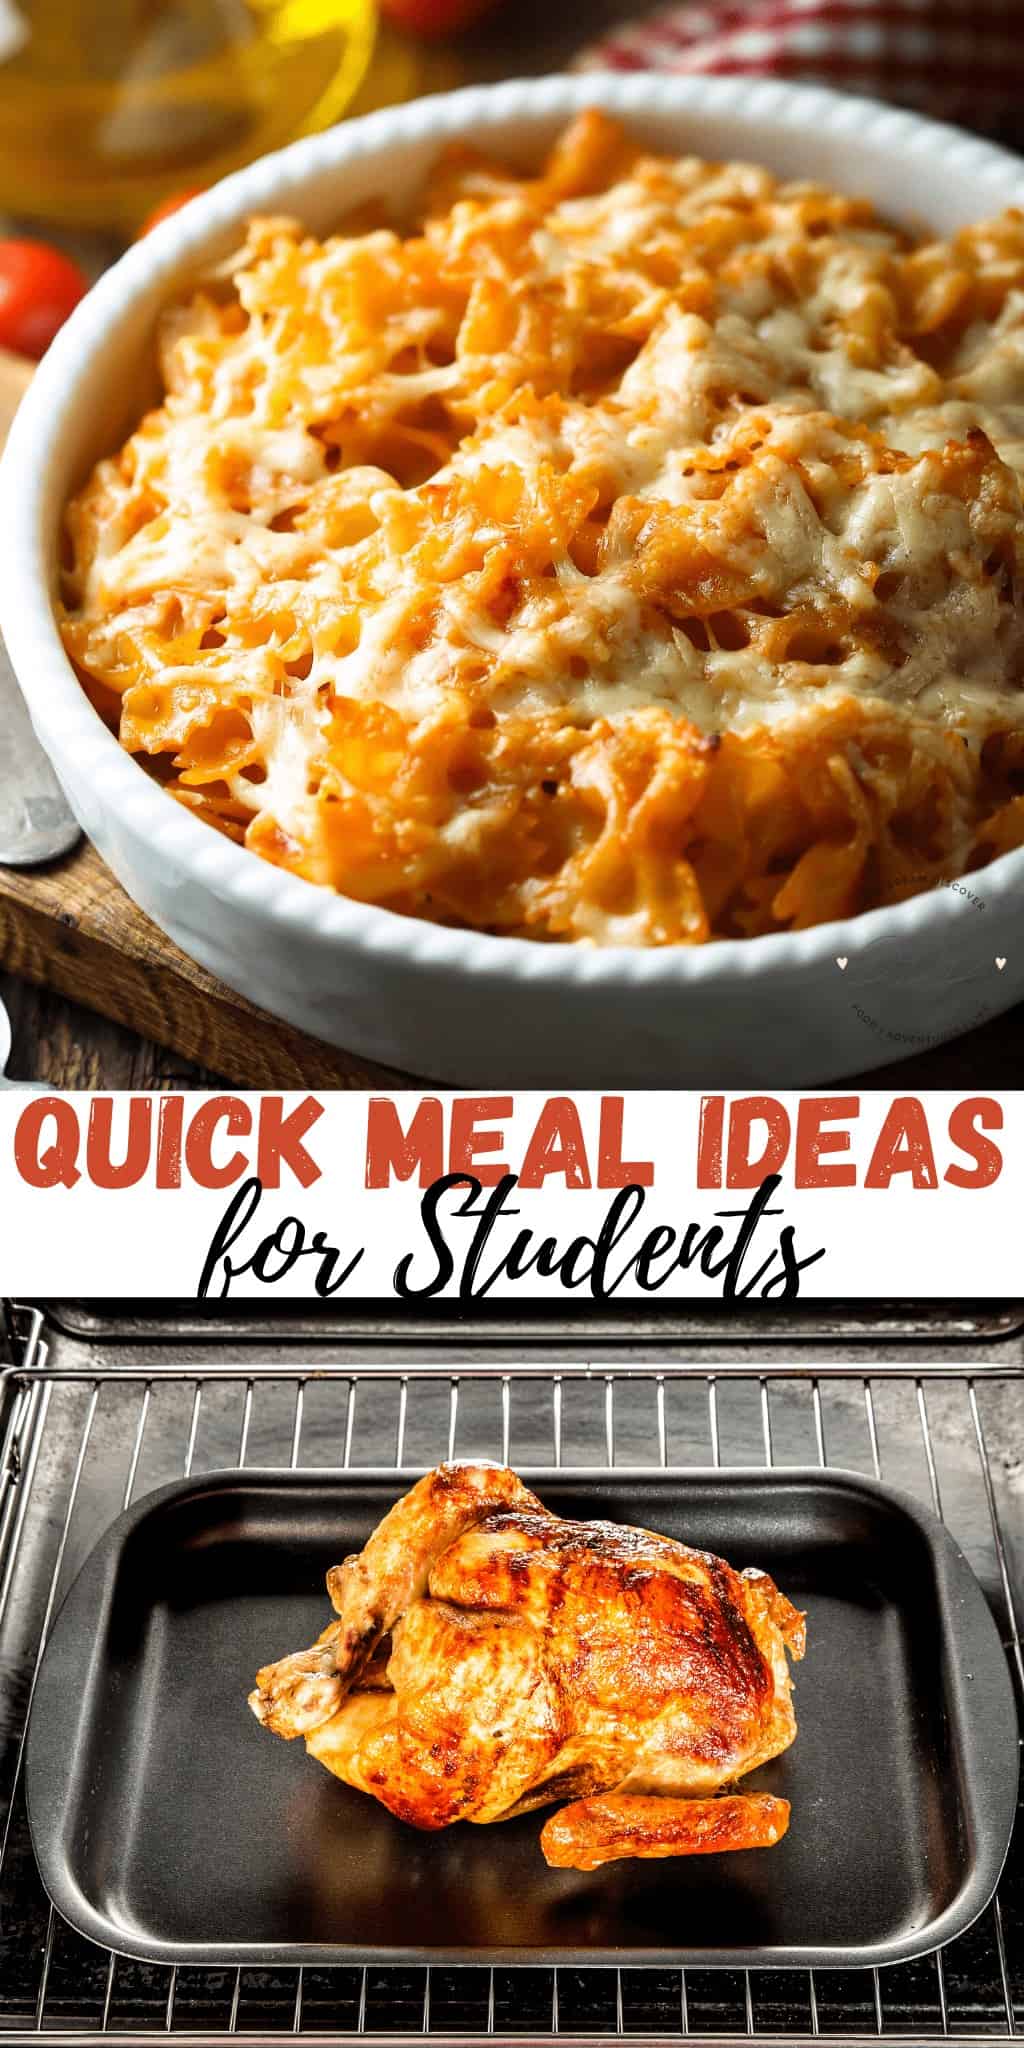 Simple & Quick Meal Ideas for Students (1)